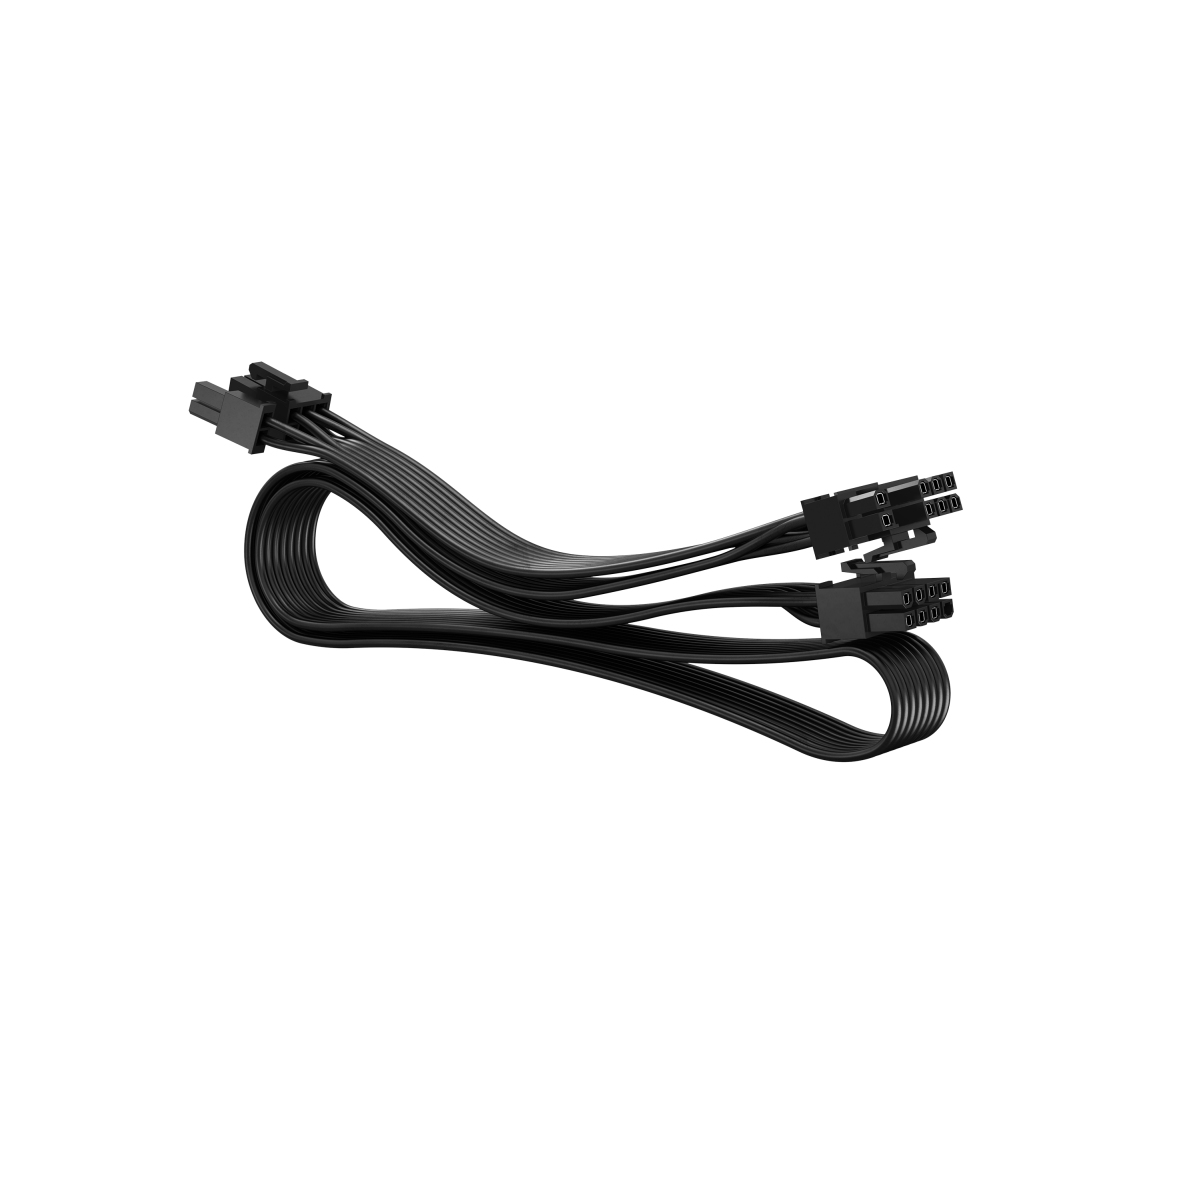 PCI-E 6+2 pin x2 modular cable for ION series 